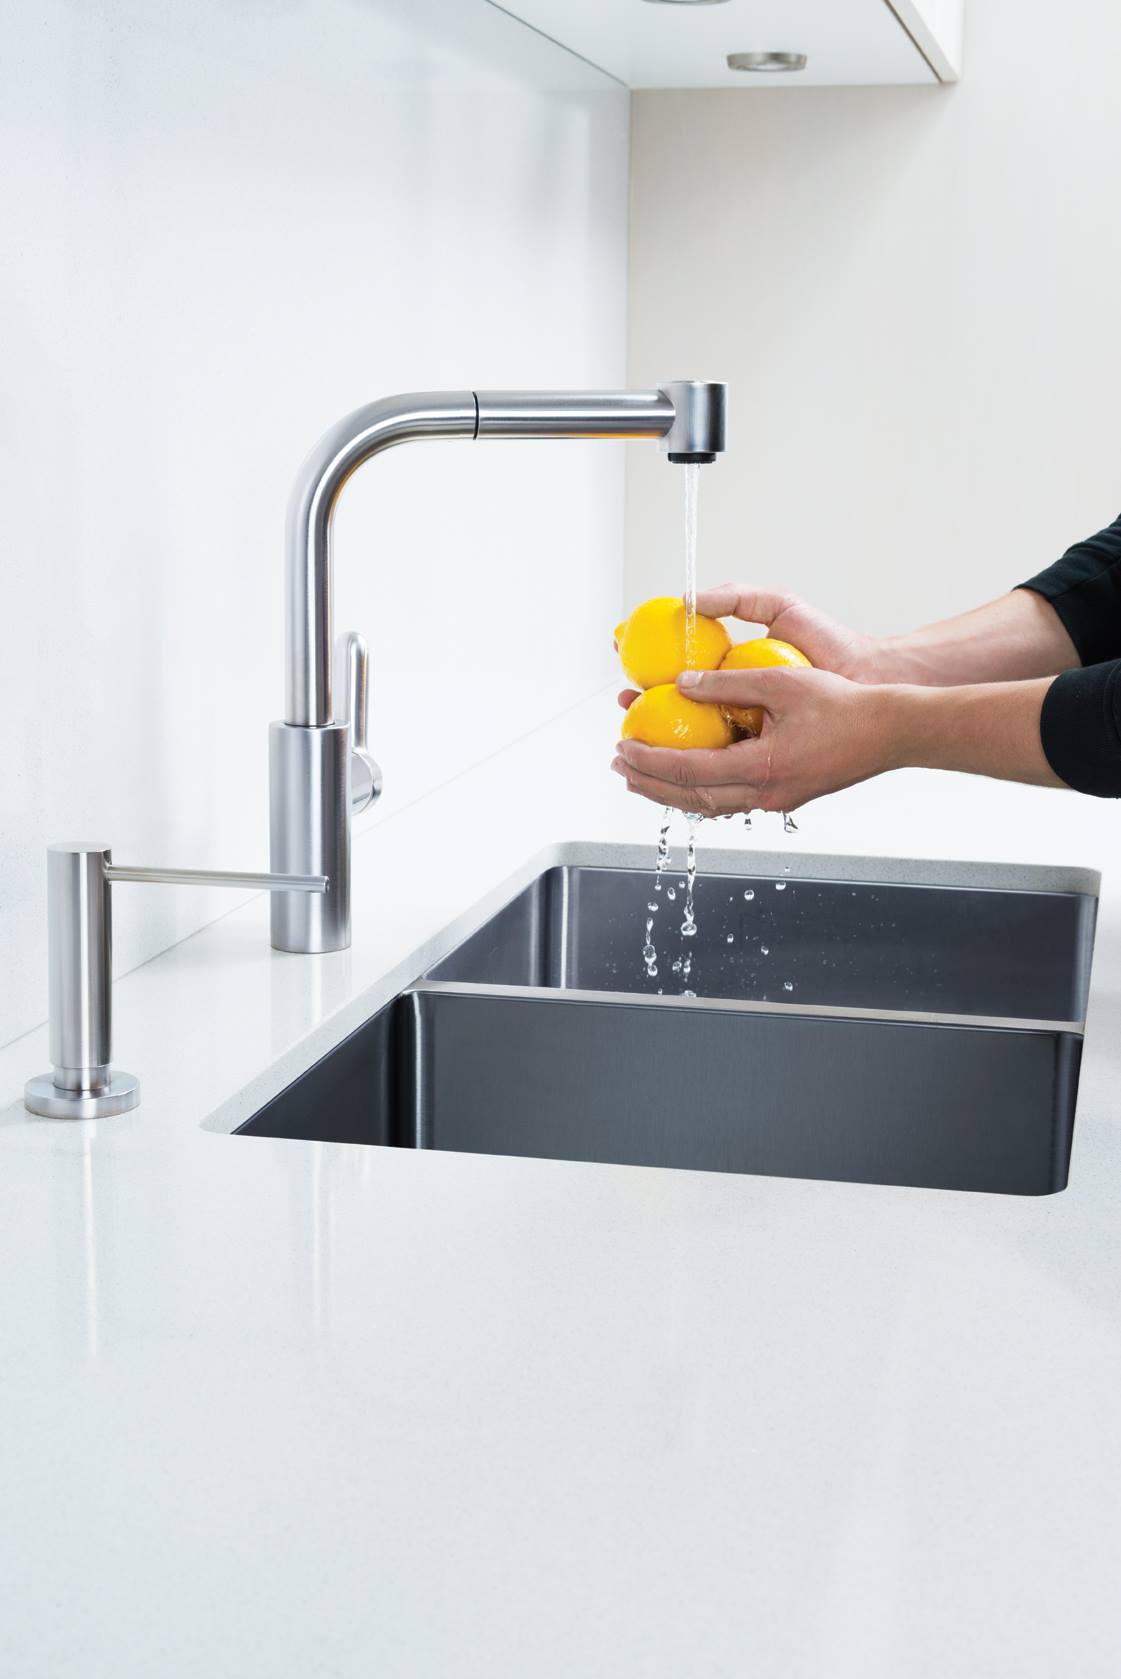 What should you know while buying faucets?